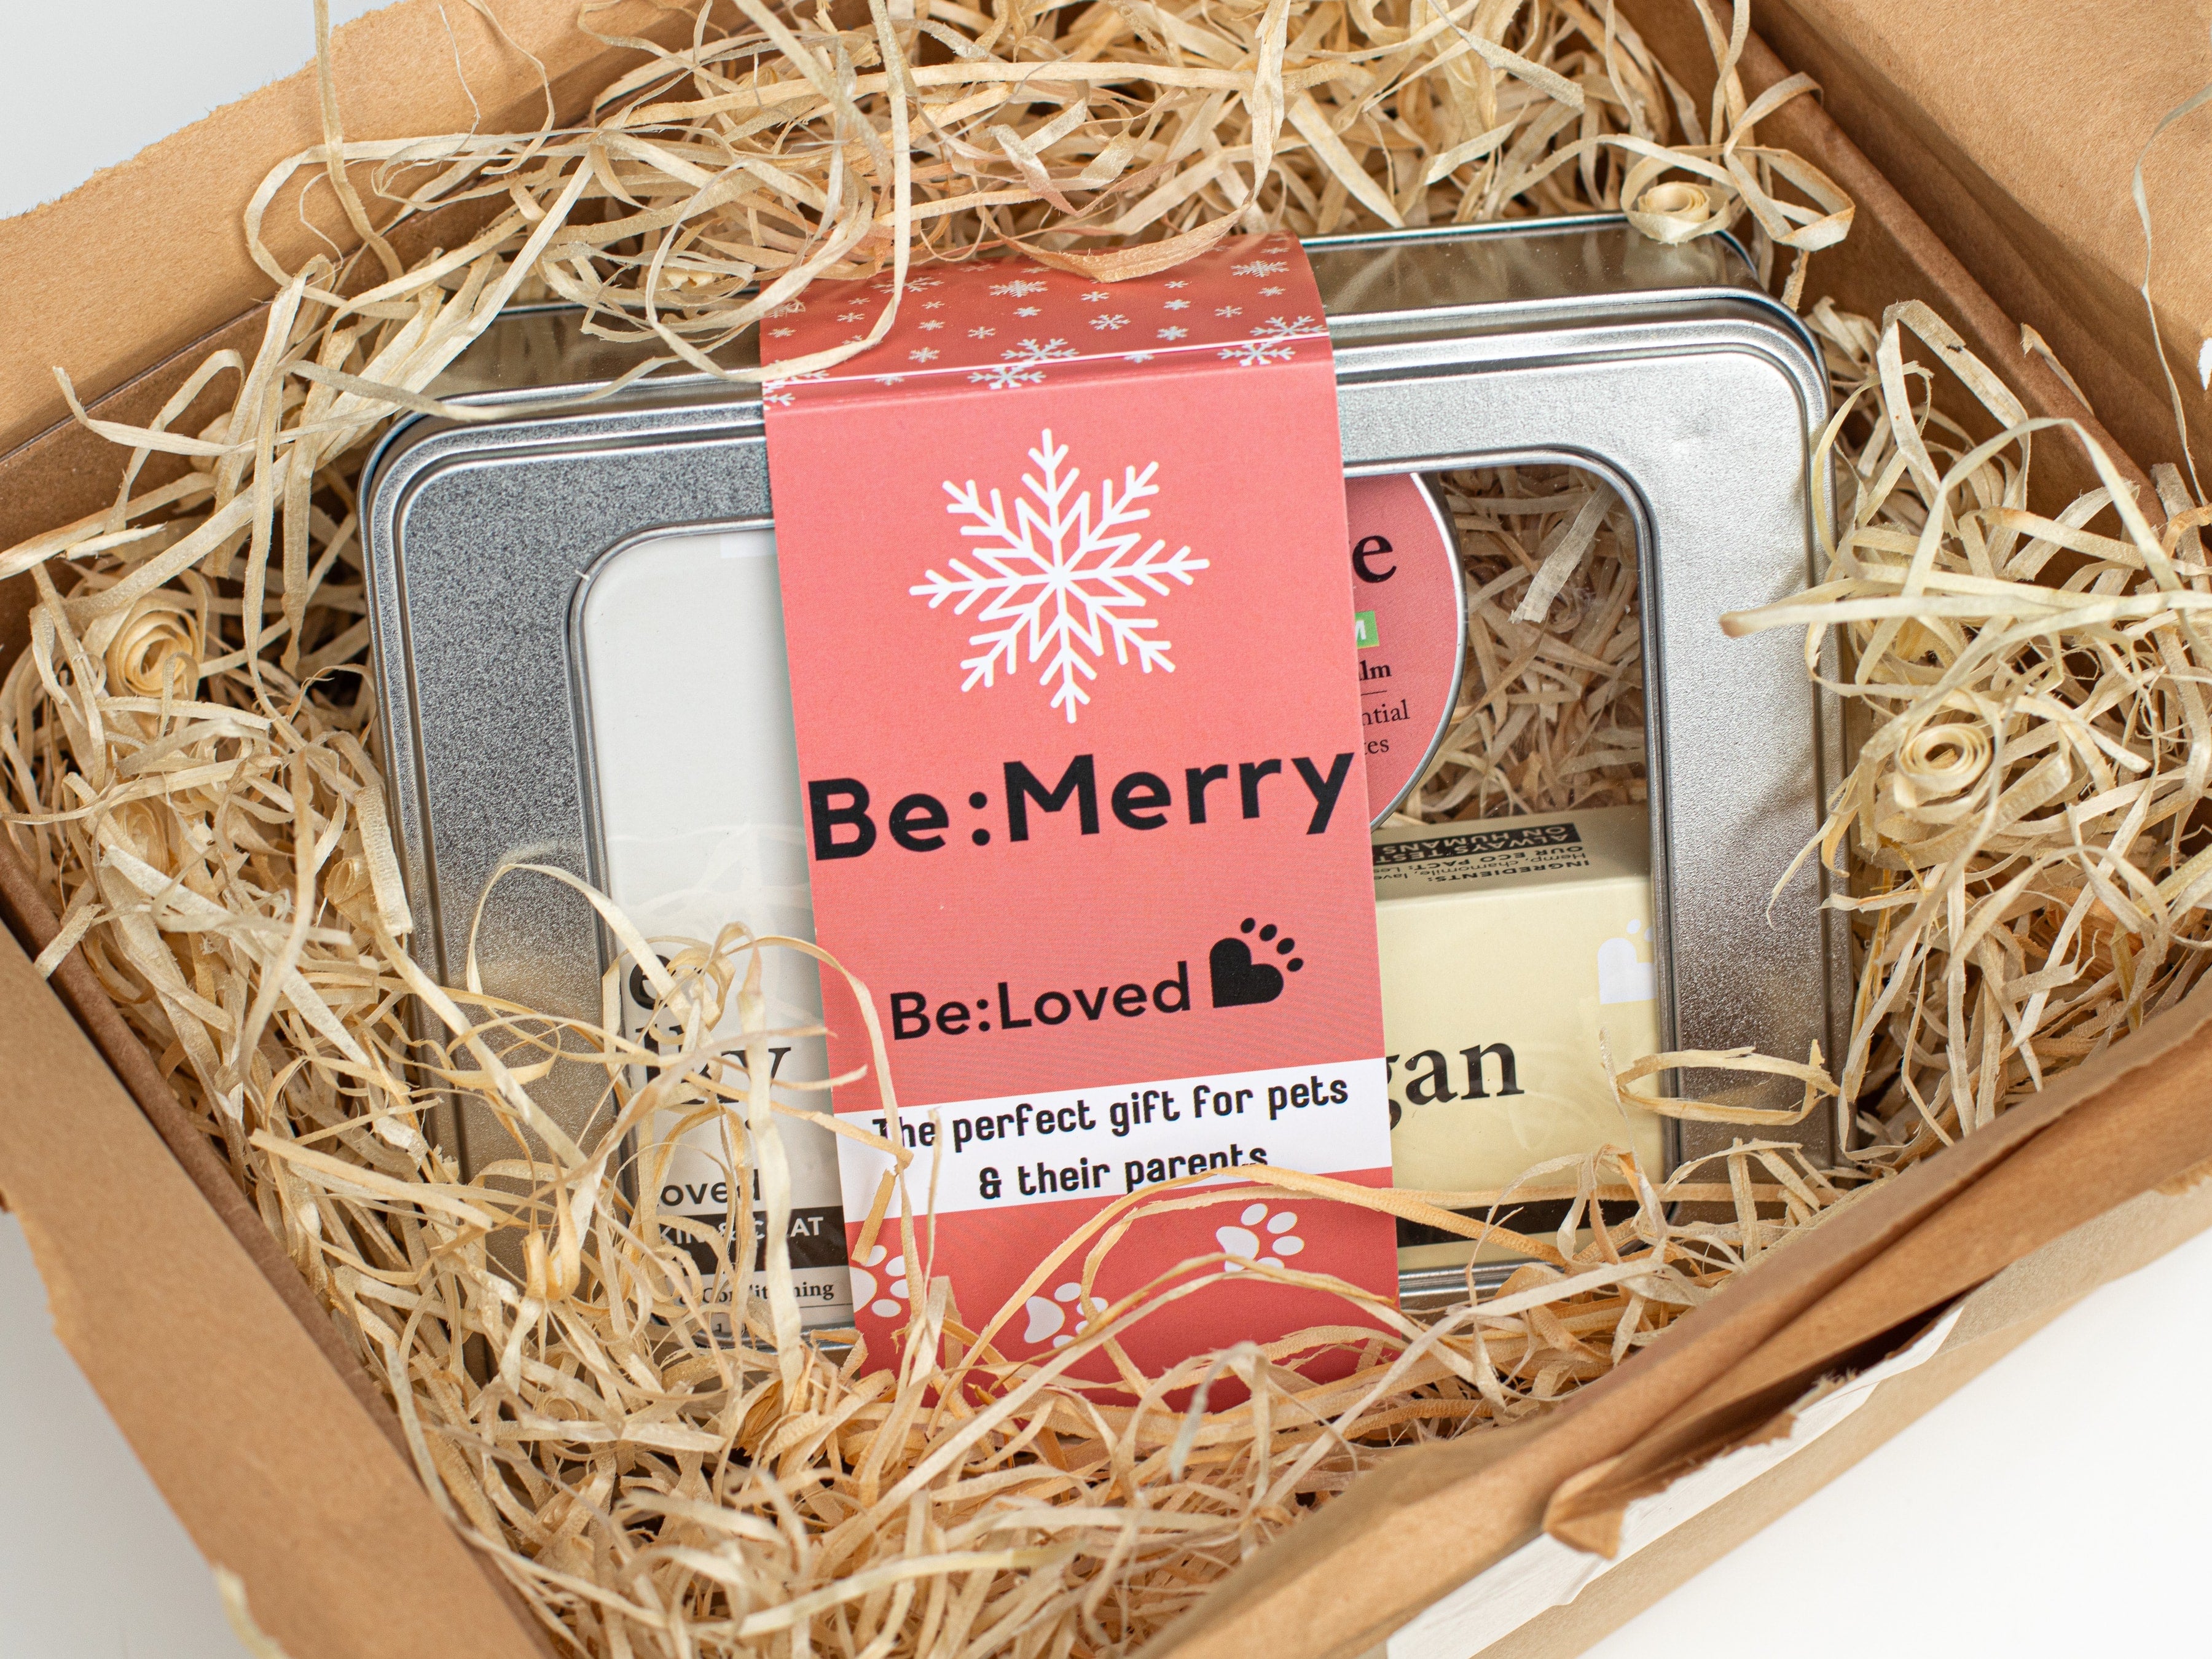 Be:Merry gift set being unboxed surrounded by straw and brown wrapping paper